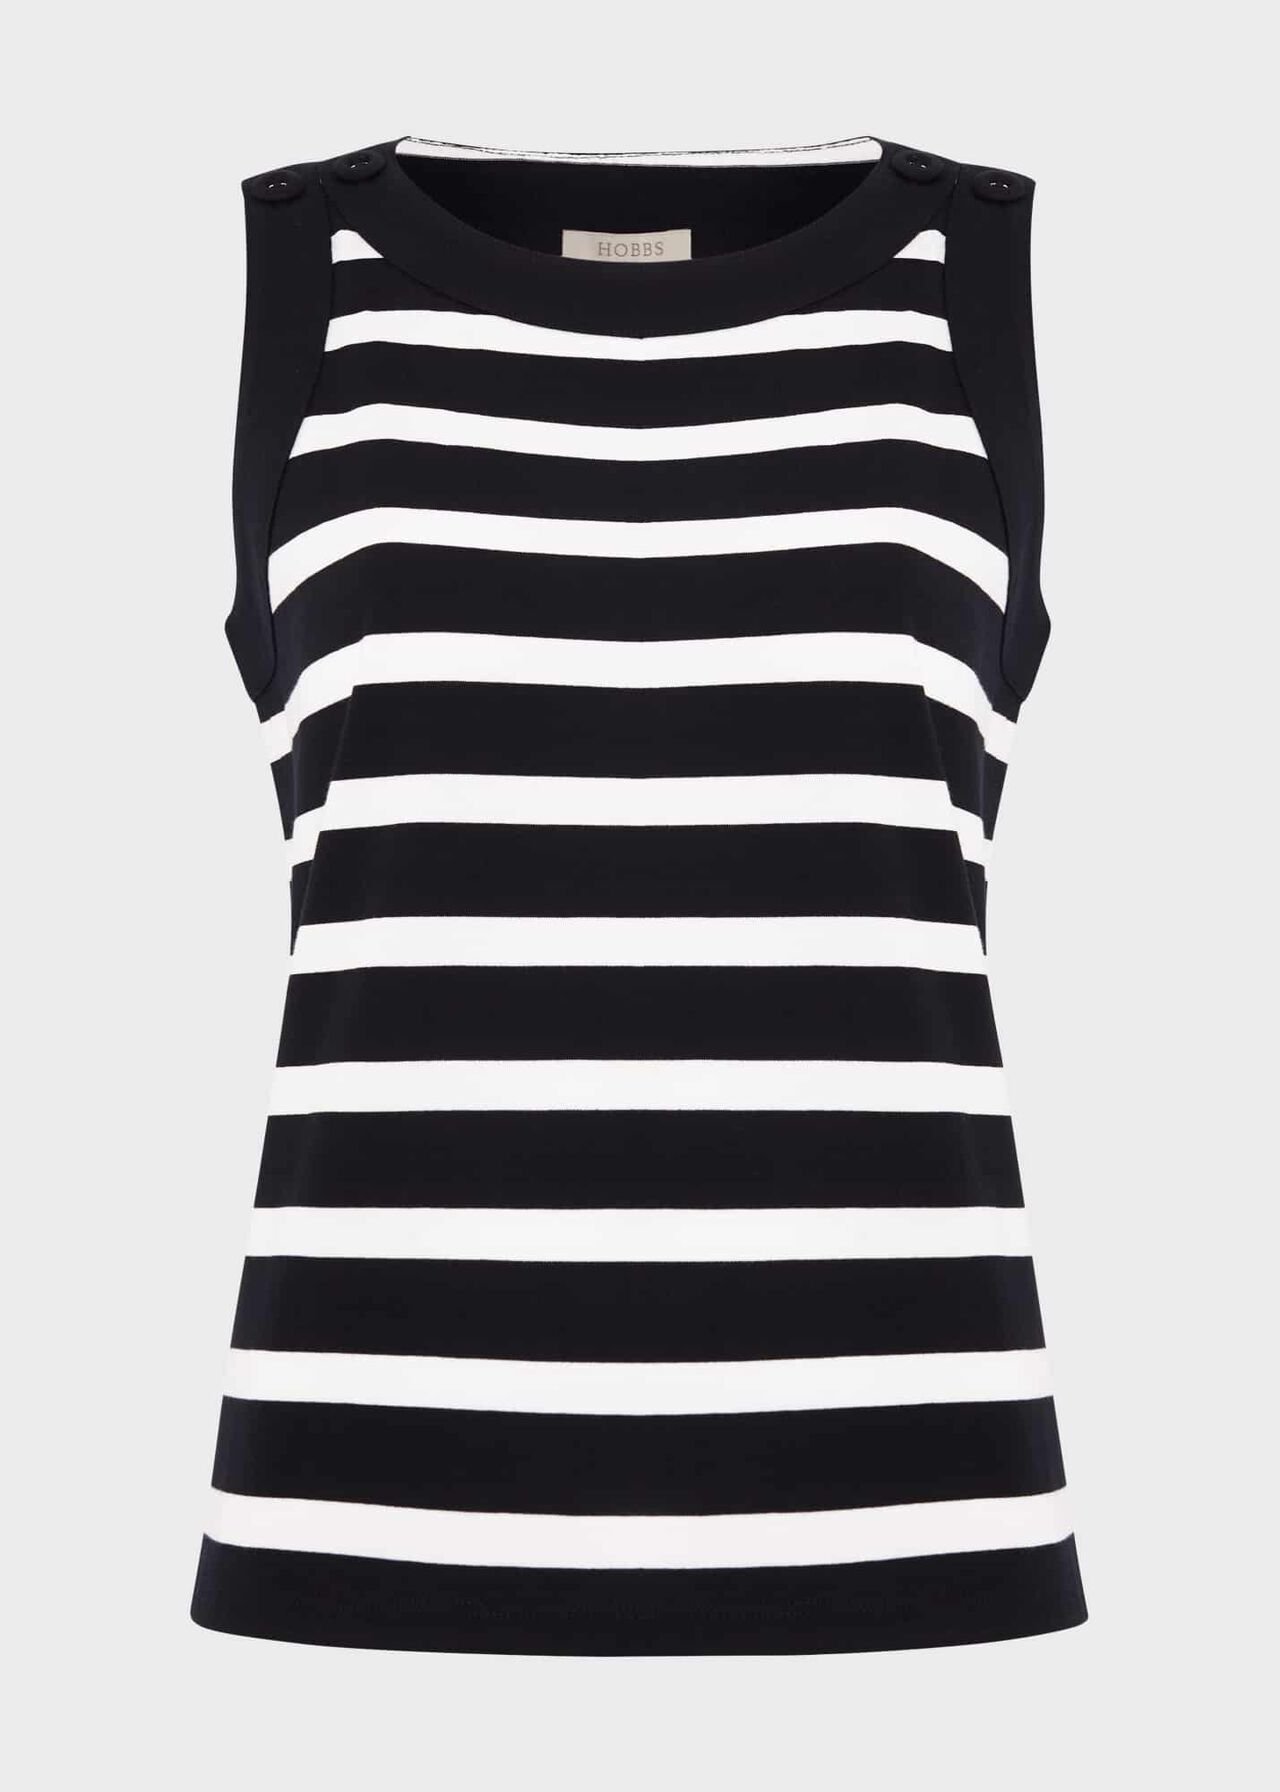 Maddy Cotton Striped Top, Navy Ivory, hi-res